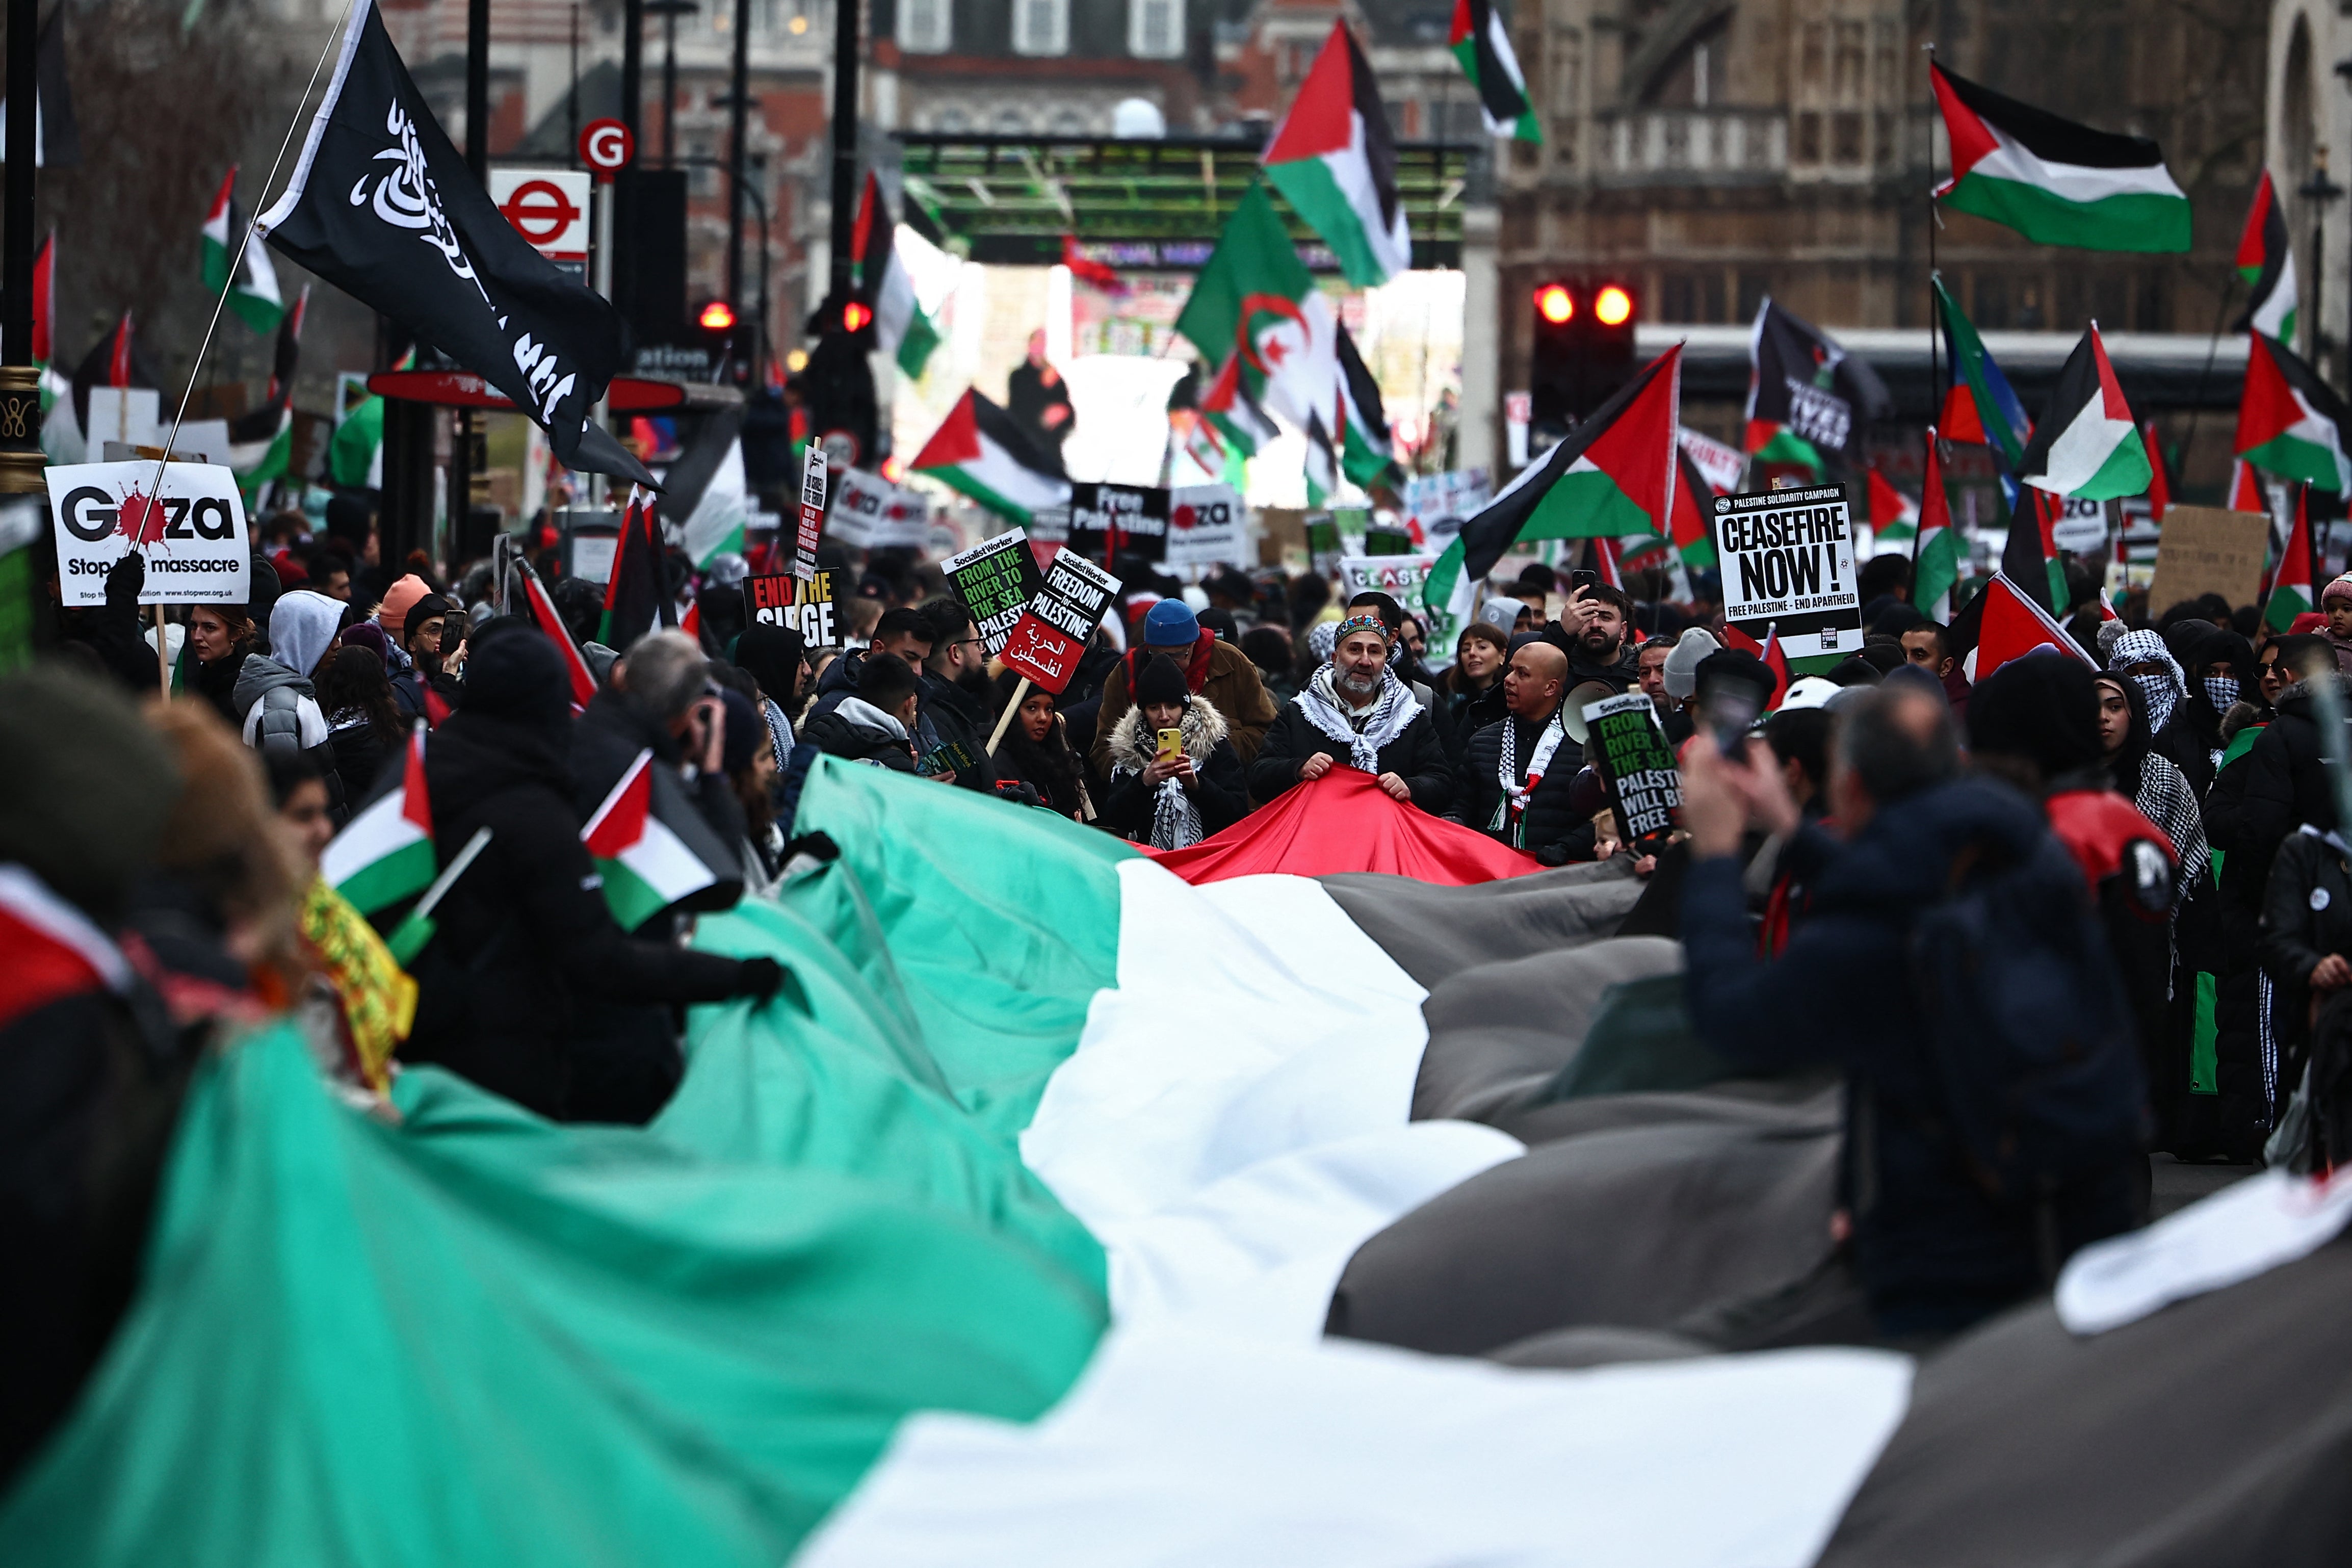 Pro-Palestinian activists and supporters display a large Palestinian flag during a national march for Palestine in central London